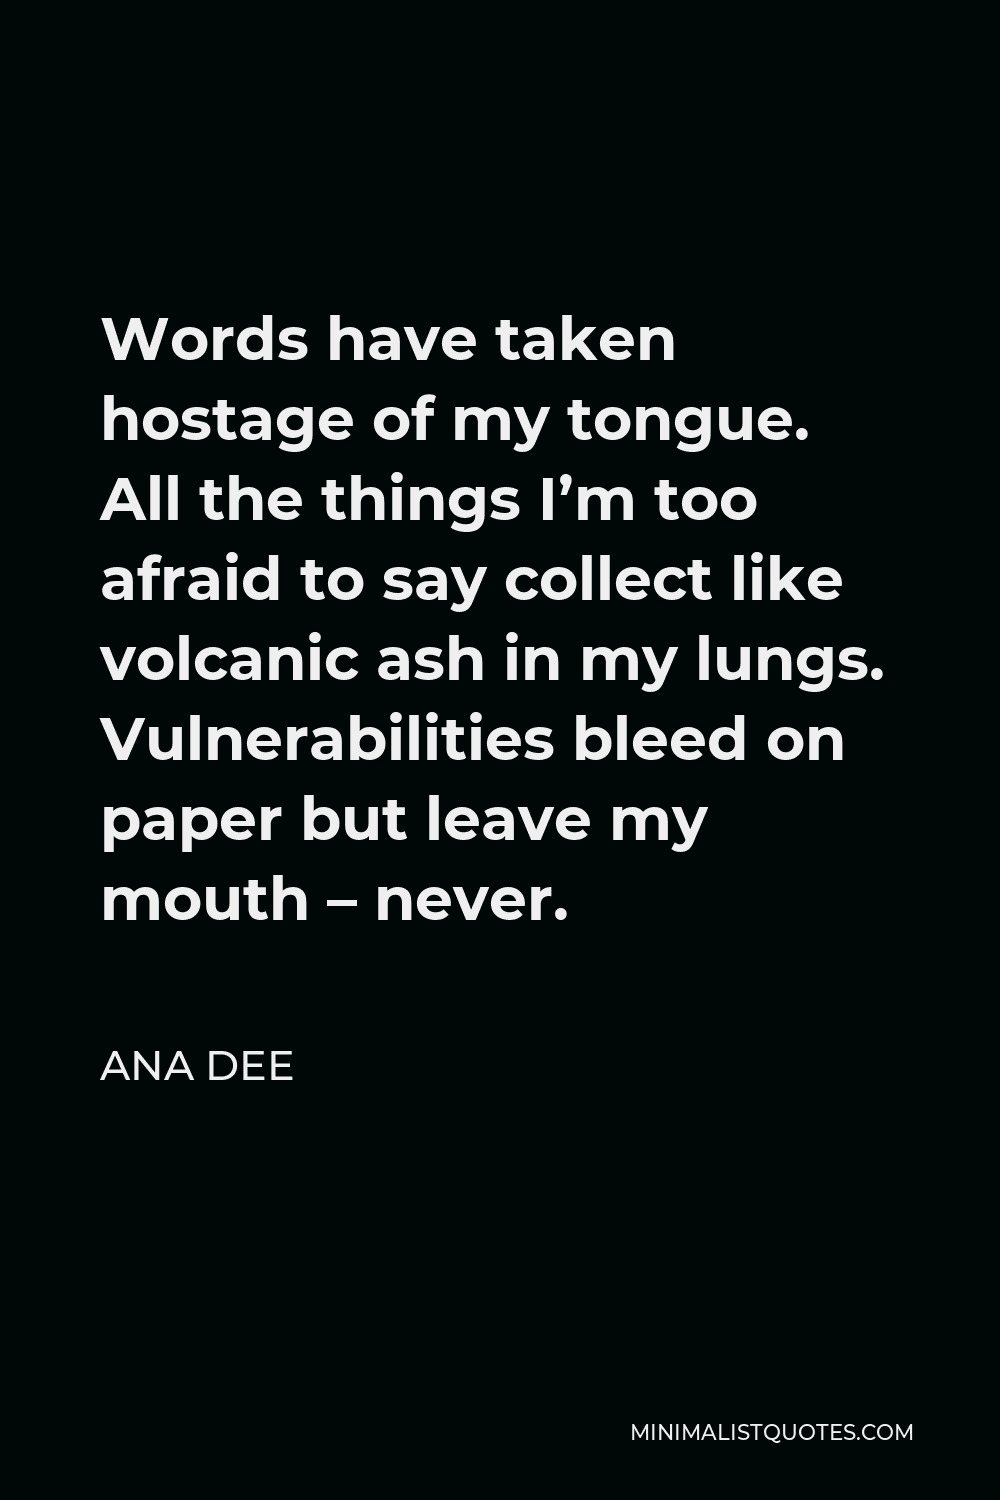 Ana Dee Quote - Words have taken hostage of my tongue. All the things I’m too afraid to say collect like volcanic ash in my lungs. Vulnerabilities bleed on paper but leave my mouth – never.